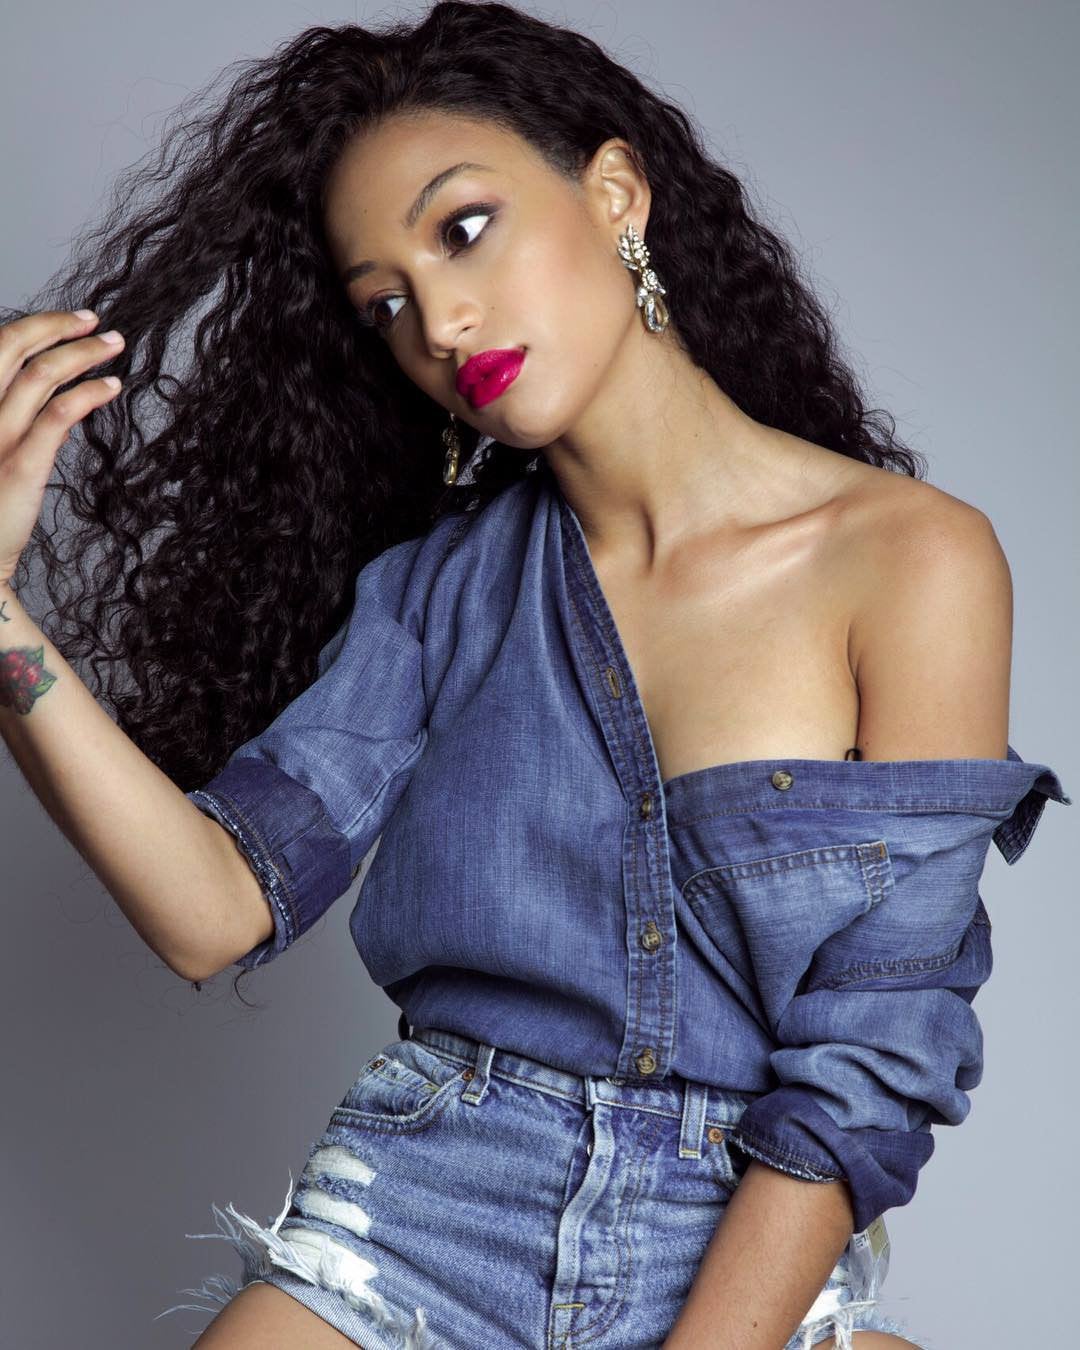 61 Sexiest Samantha Logan Pictures You Just Can't Lay Your Eyes Off